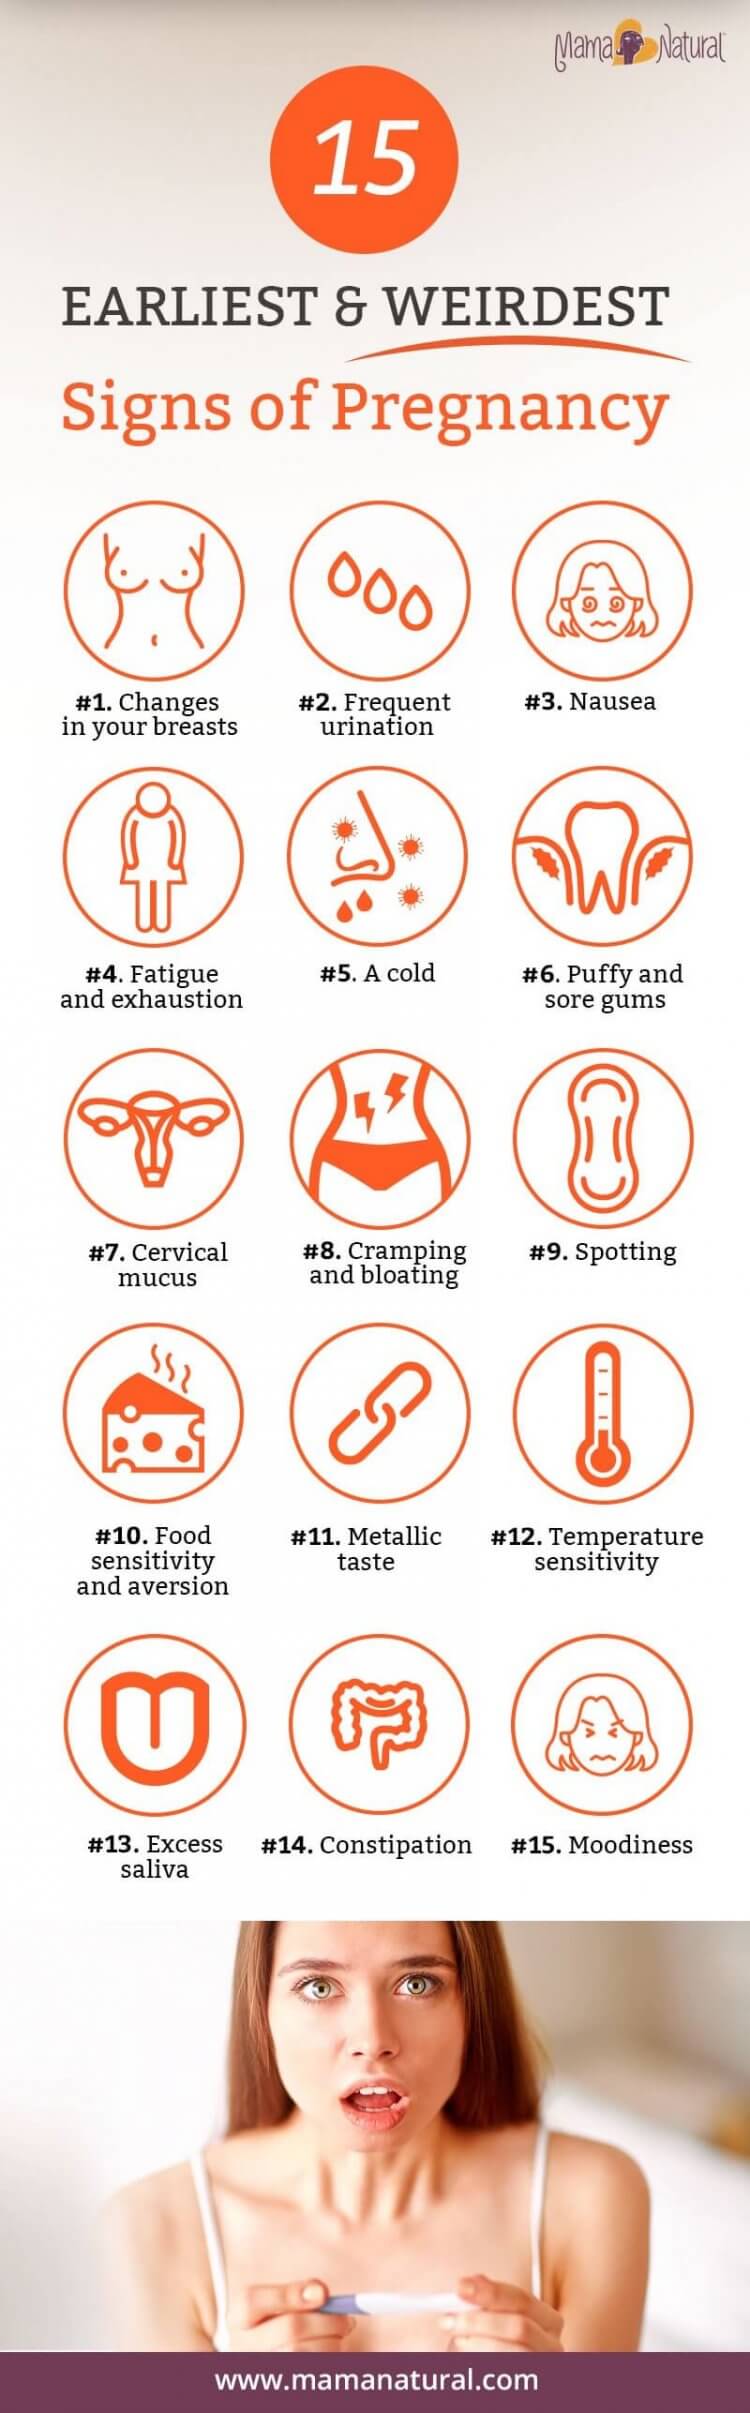 https://www.mamanatural.com/wp-content/uploads/Signs-of-Pregnancy-The-15-Earliest-and-Weirdest-Pregnancy-Symptoms-by-Mama-Natural-750x2413.jpg